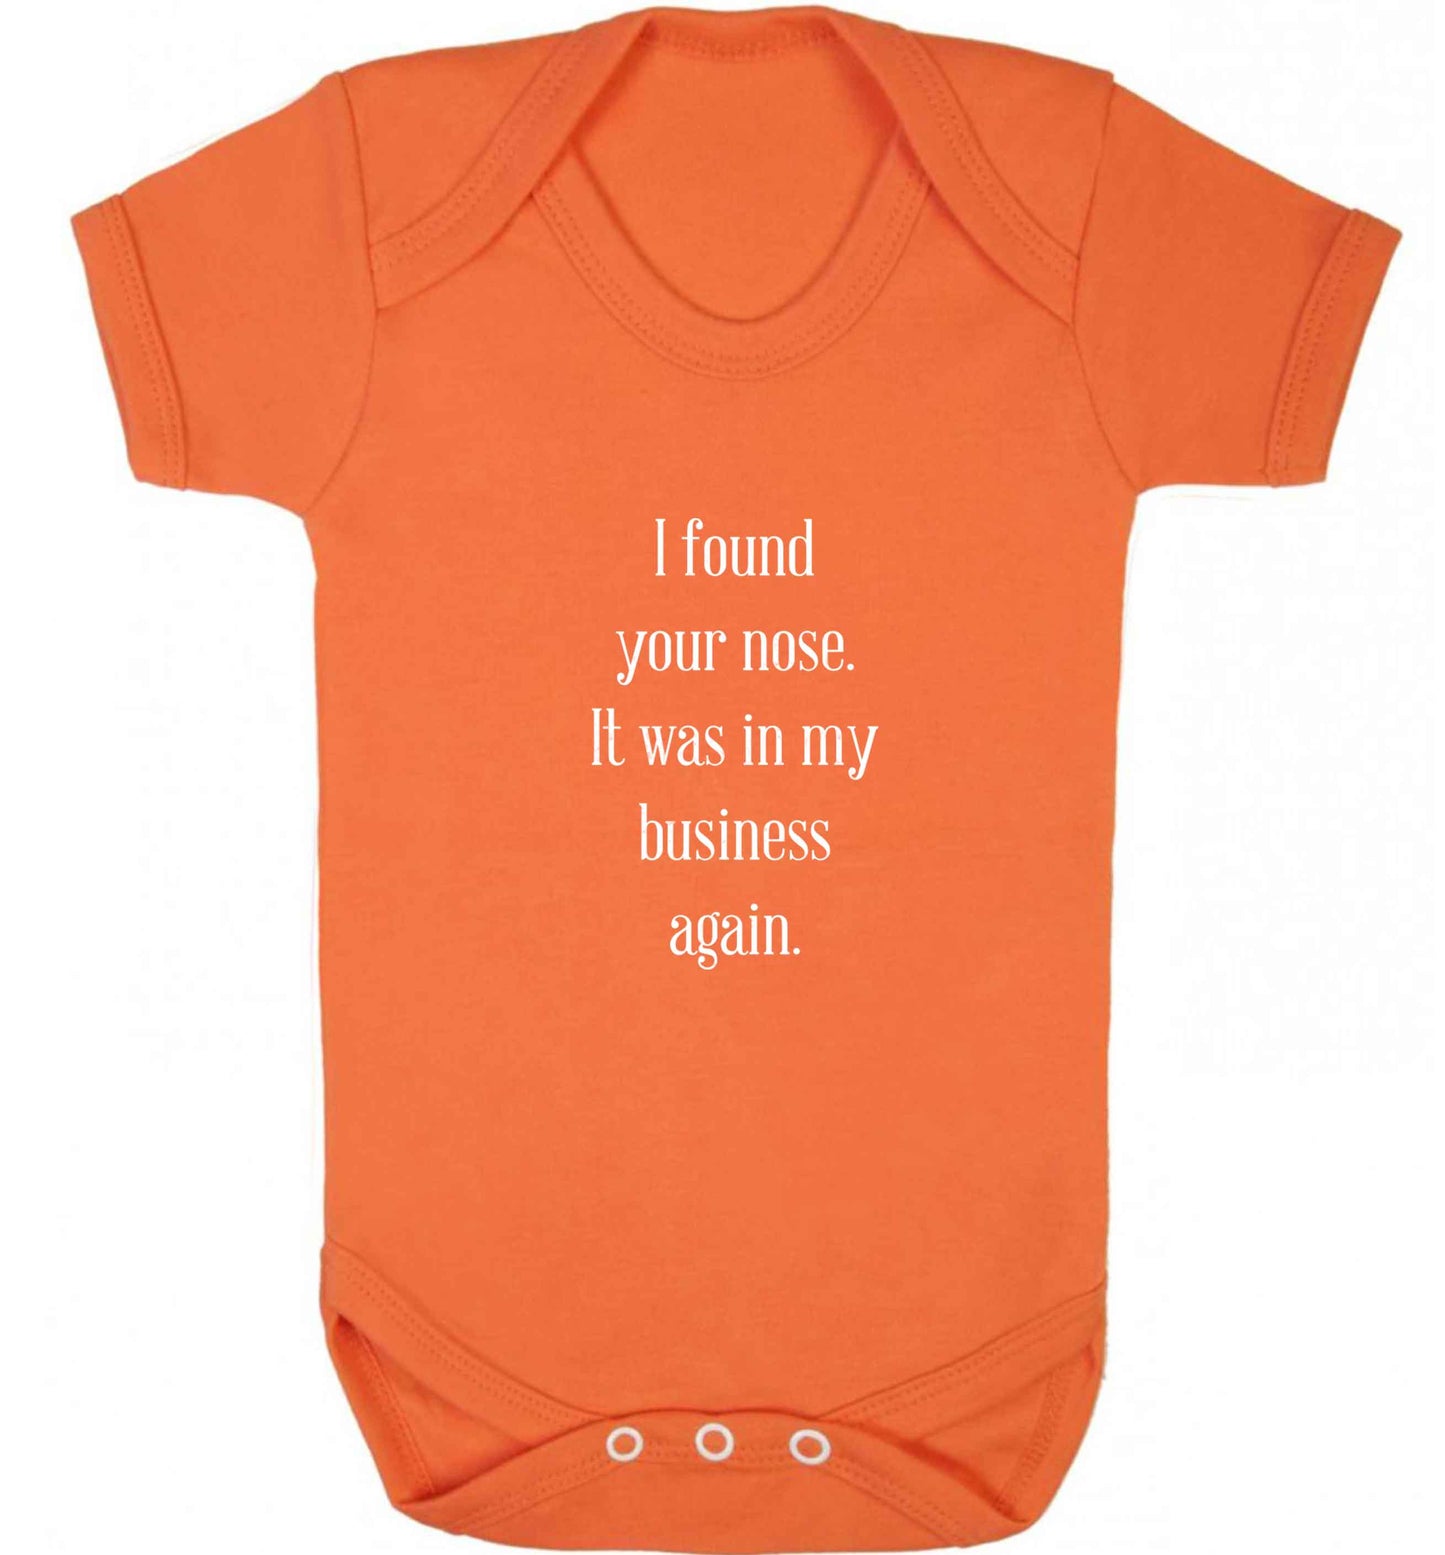 I found your nose it was in my business again baby vest orange 18-24 months